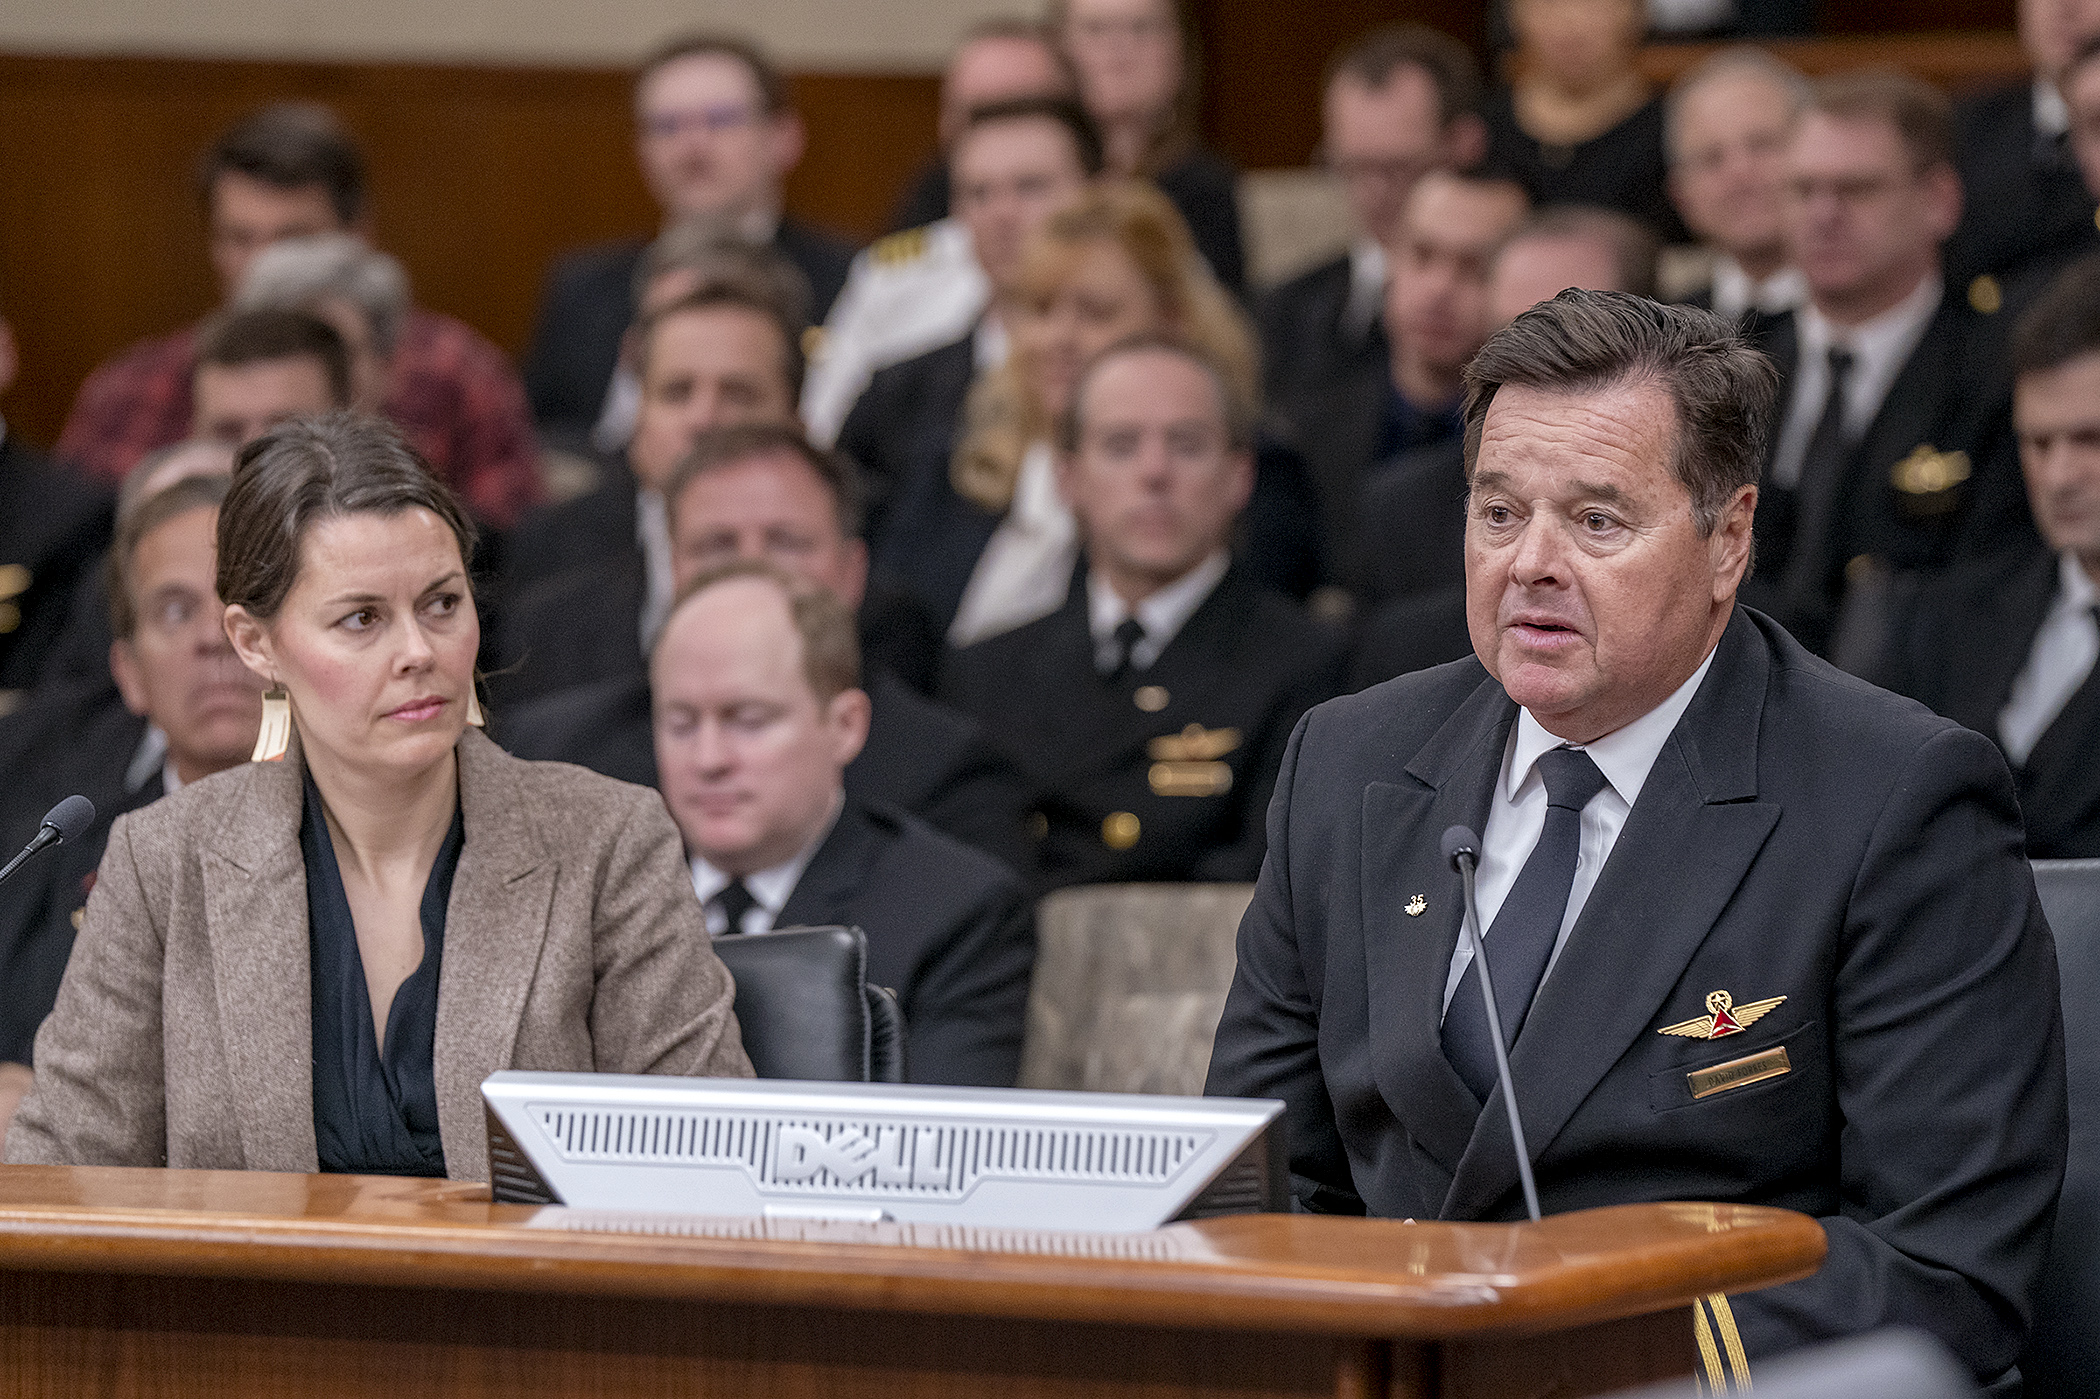 Delta Airlines Capt. David Forbes testifies Feb. 22 before the House labor committee on HF3882. It would allow airline flight attendants and pilots to receive earned sick and safe time benefits. Rep. Liz Olson is the sponsor. (Photo by Michele Jokinen)